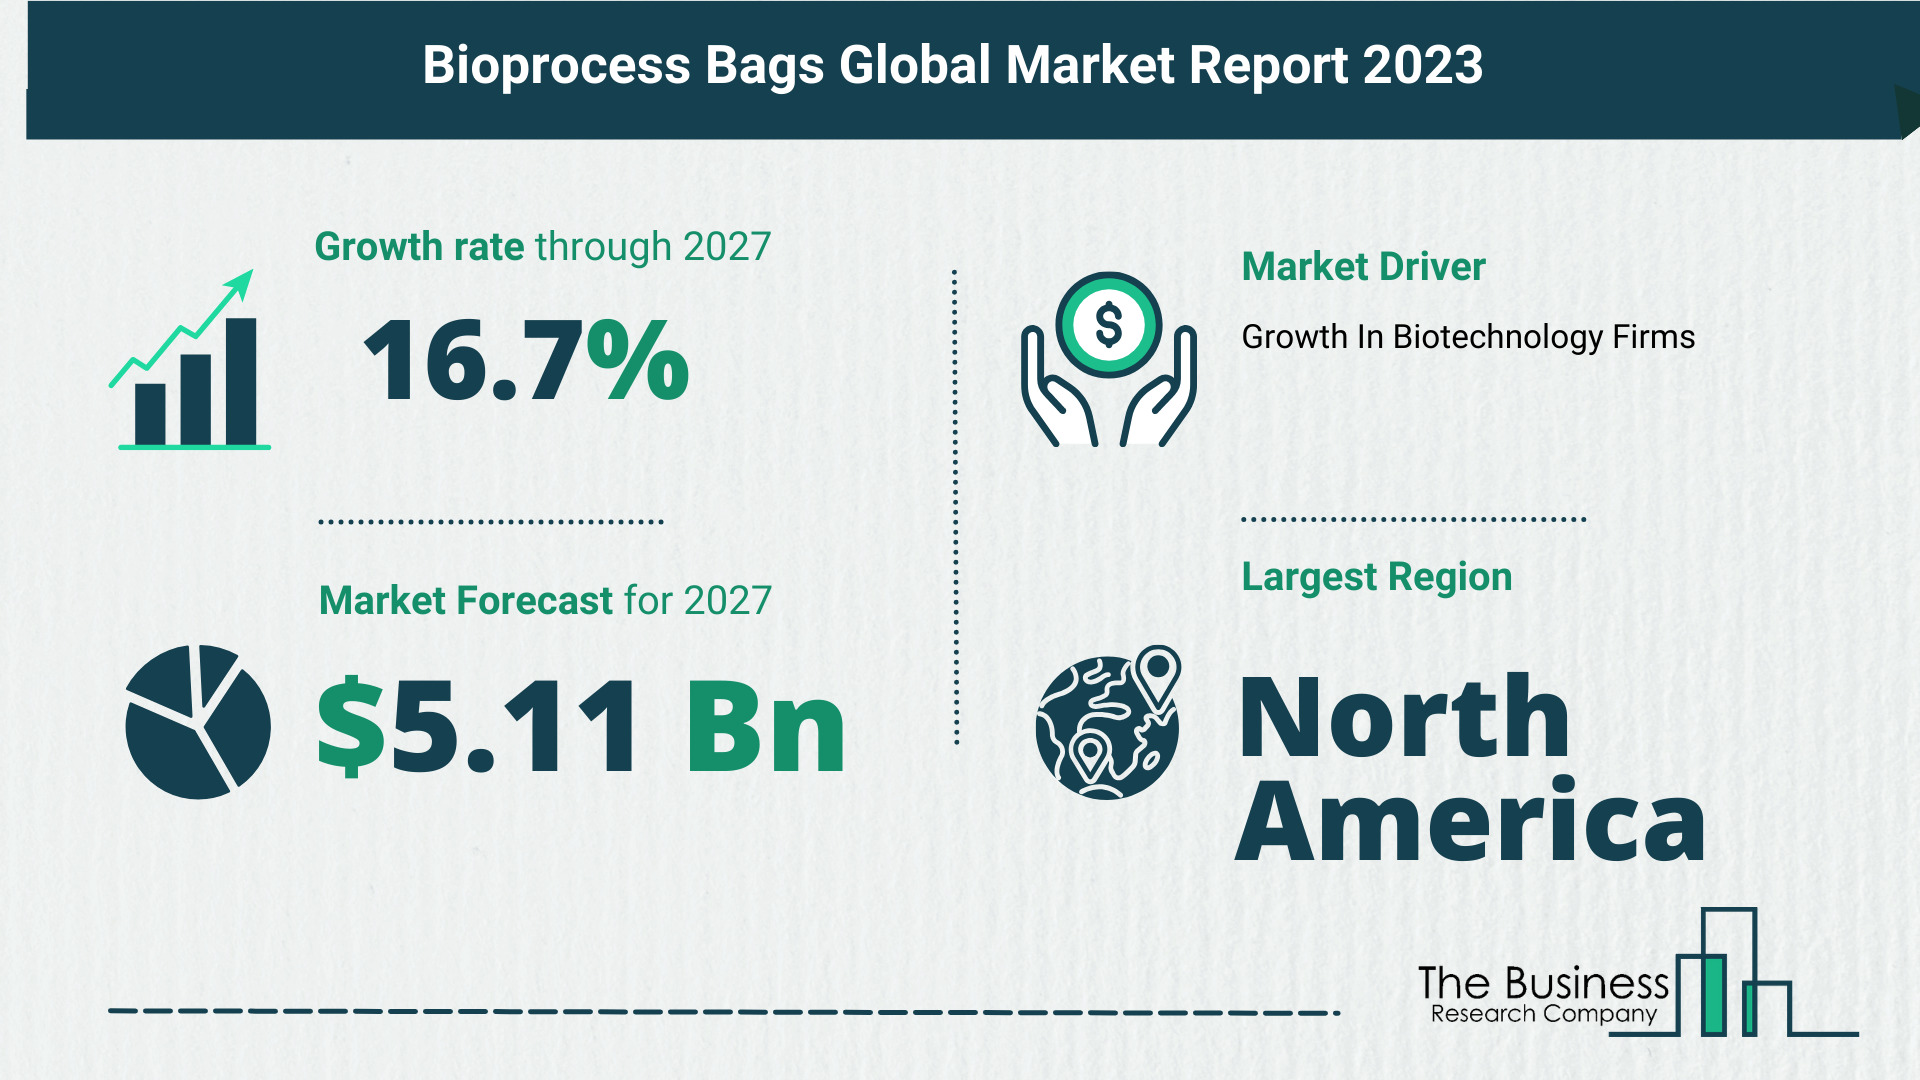 Global Bioprocess Bags Market Analysis: Estimated Market Size And Growth Rate